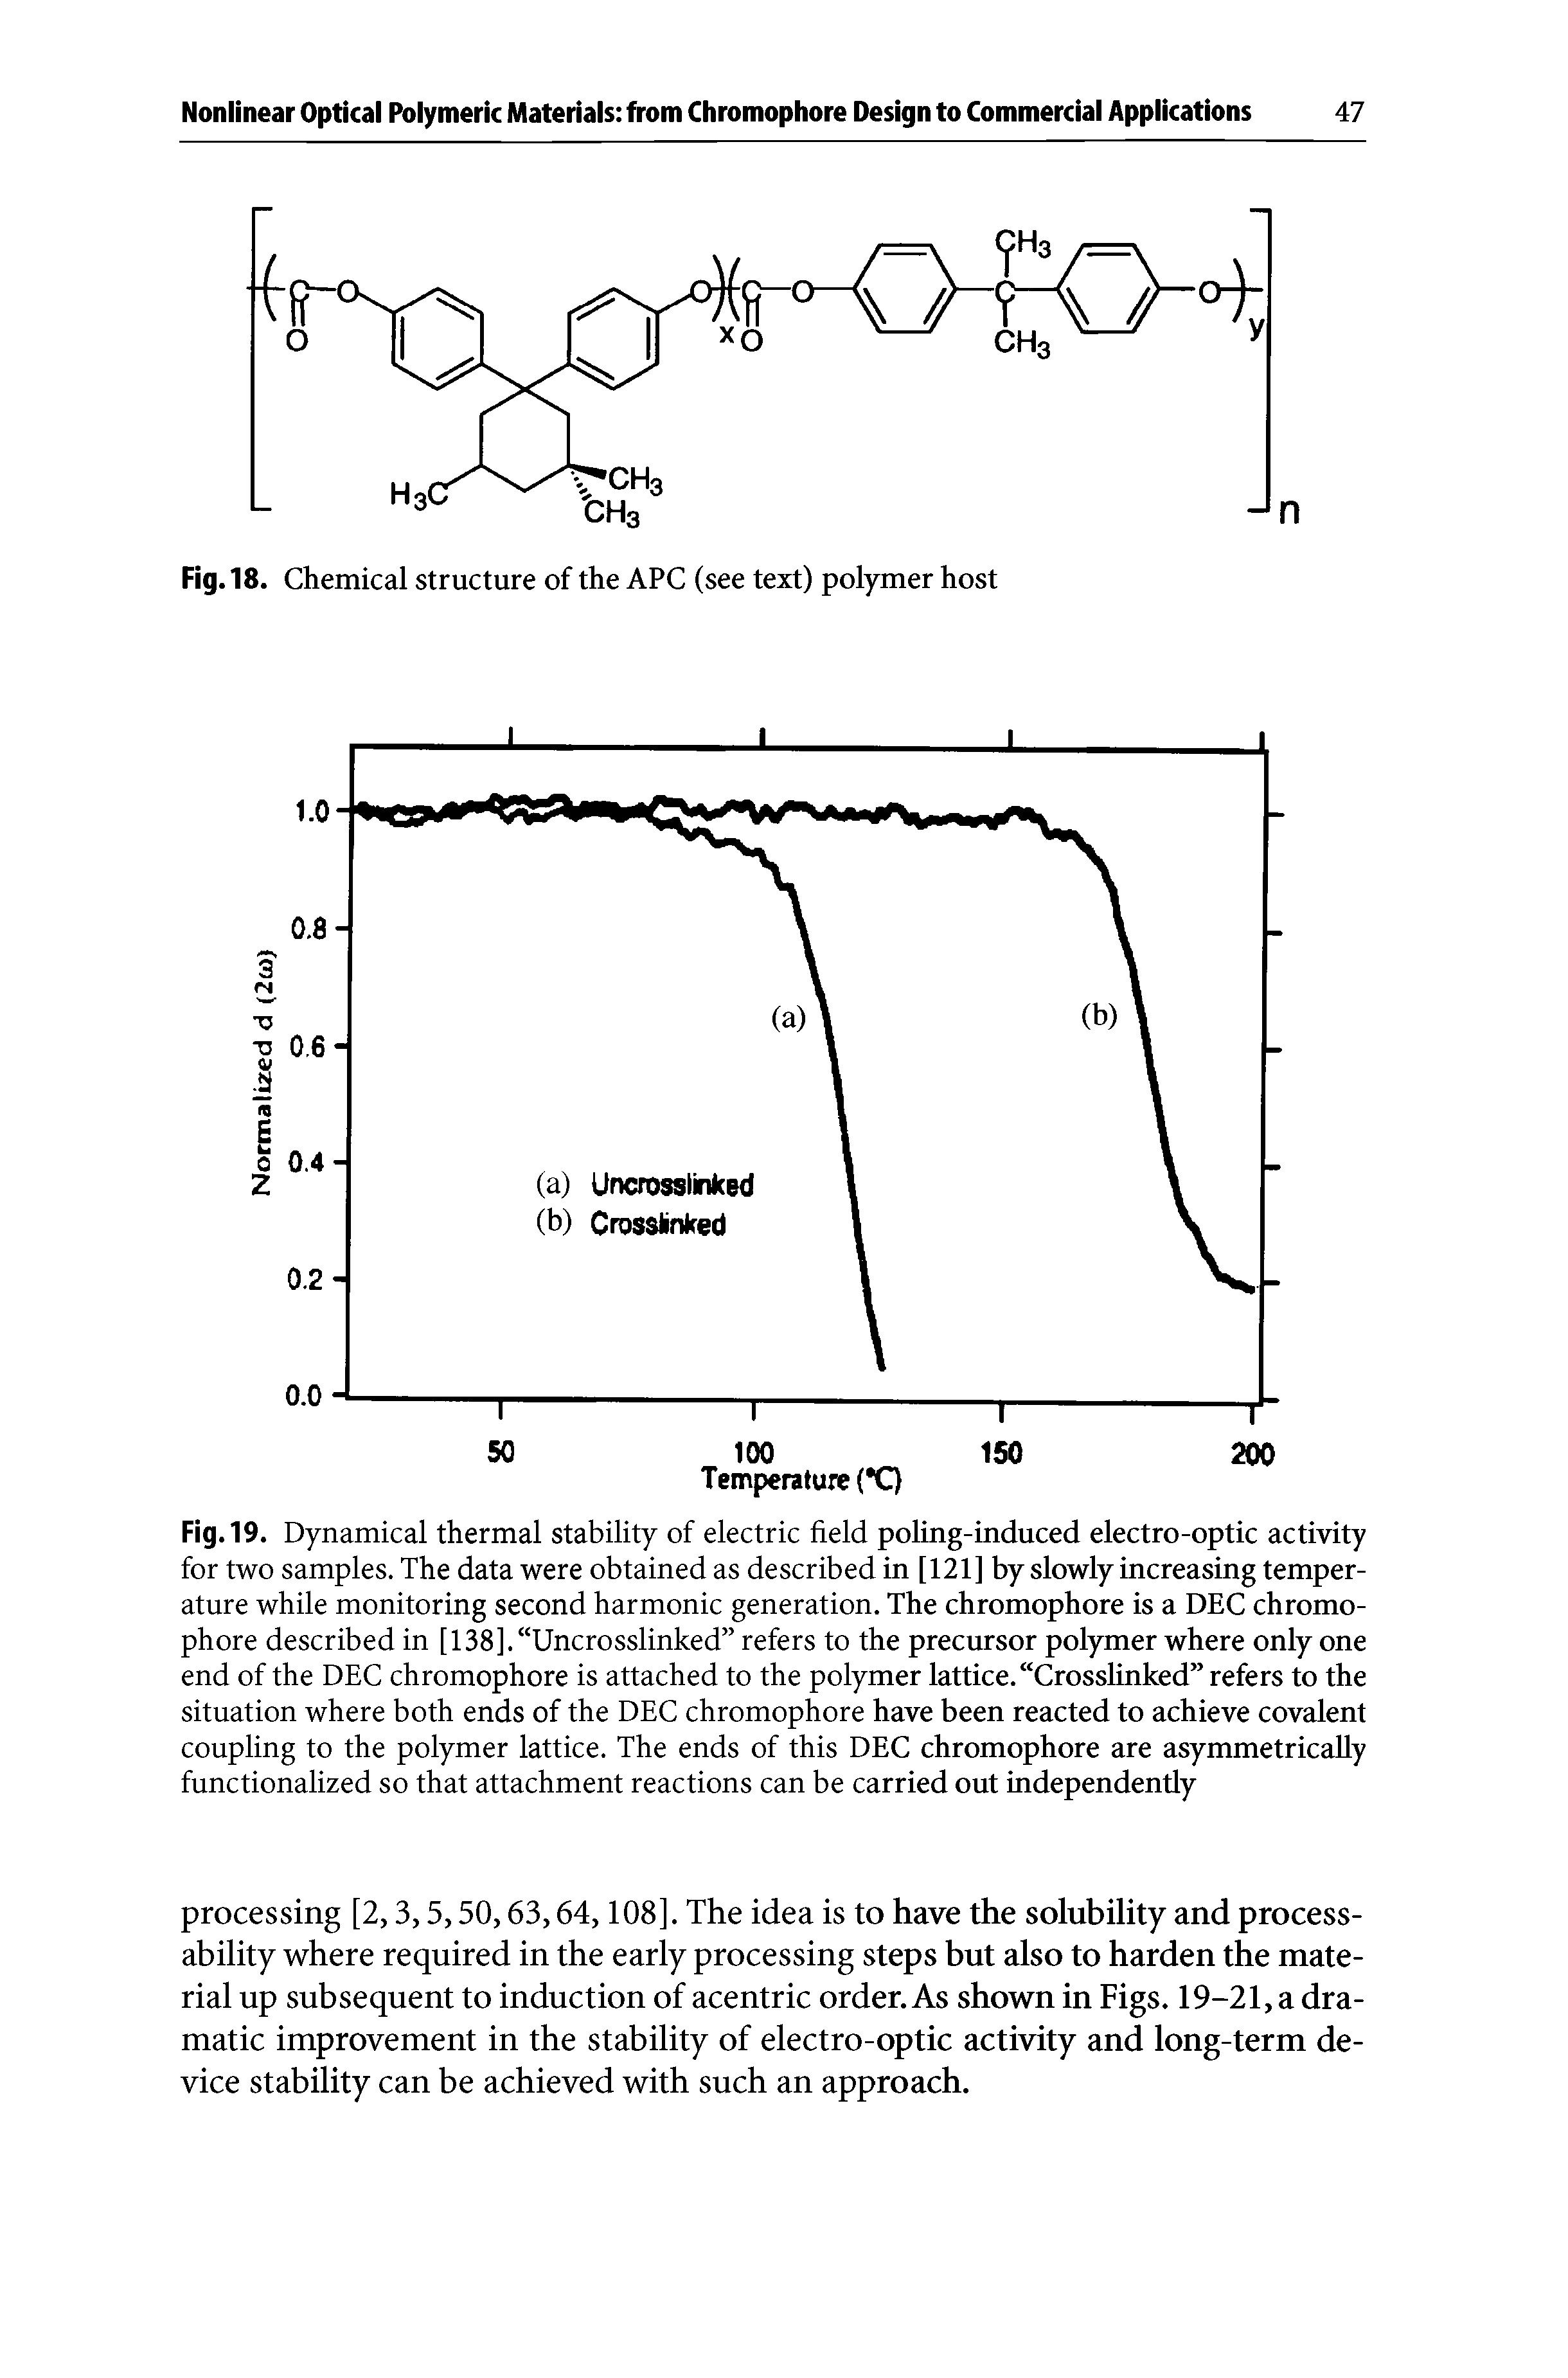 Fig. 19. Dynamical thermal stability of electric field poling-induced electro-optic activity for two samples. The data were obtained as described in [121] by slowly increasing temperature while monitoring second harmonic generation. The chromophore is a DEC chromophore described in [138]. Uncrosslinked refers to the precursor polymer where only one end of the DEC chromophore is attached to the polymer lattice. Crosslinked refers to the situation where both ends of the DEC chromophore have been reacted to achieve covalent coupling to the polymer lattice. The ends of this DEC chromophore are asymmetrically functionalized so that attachment reactions can be carried out independently...